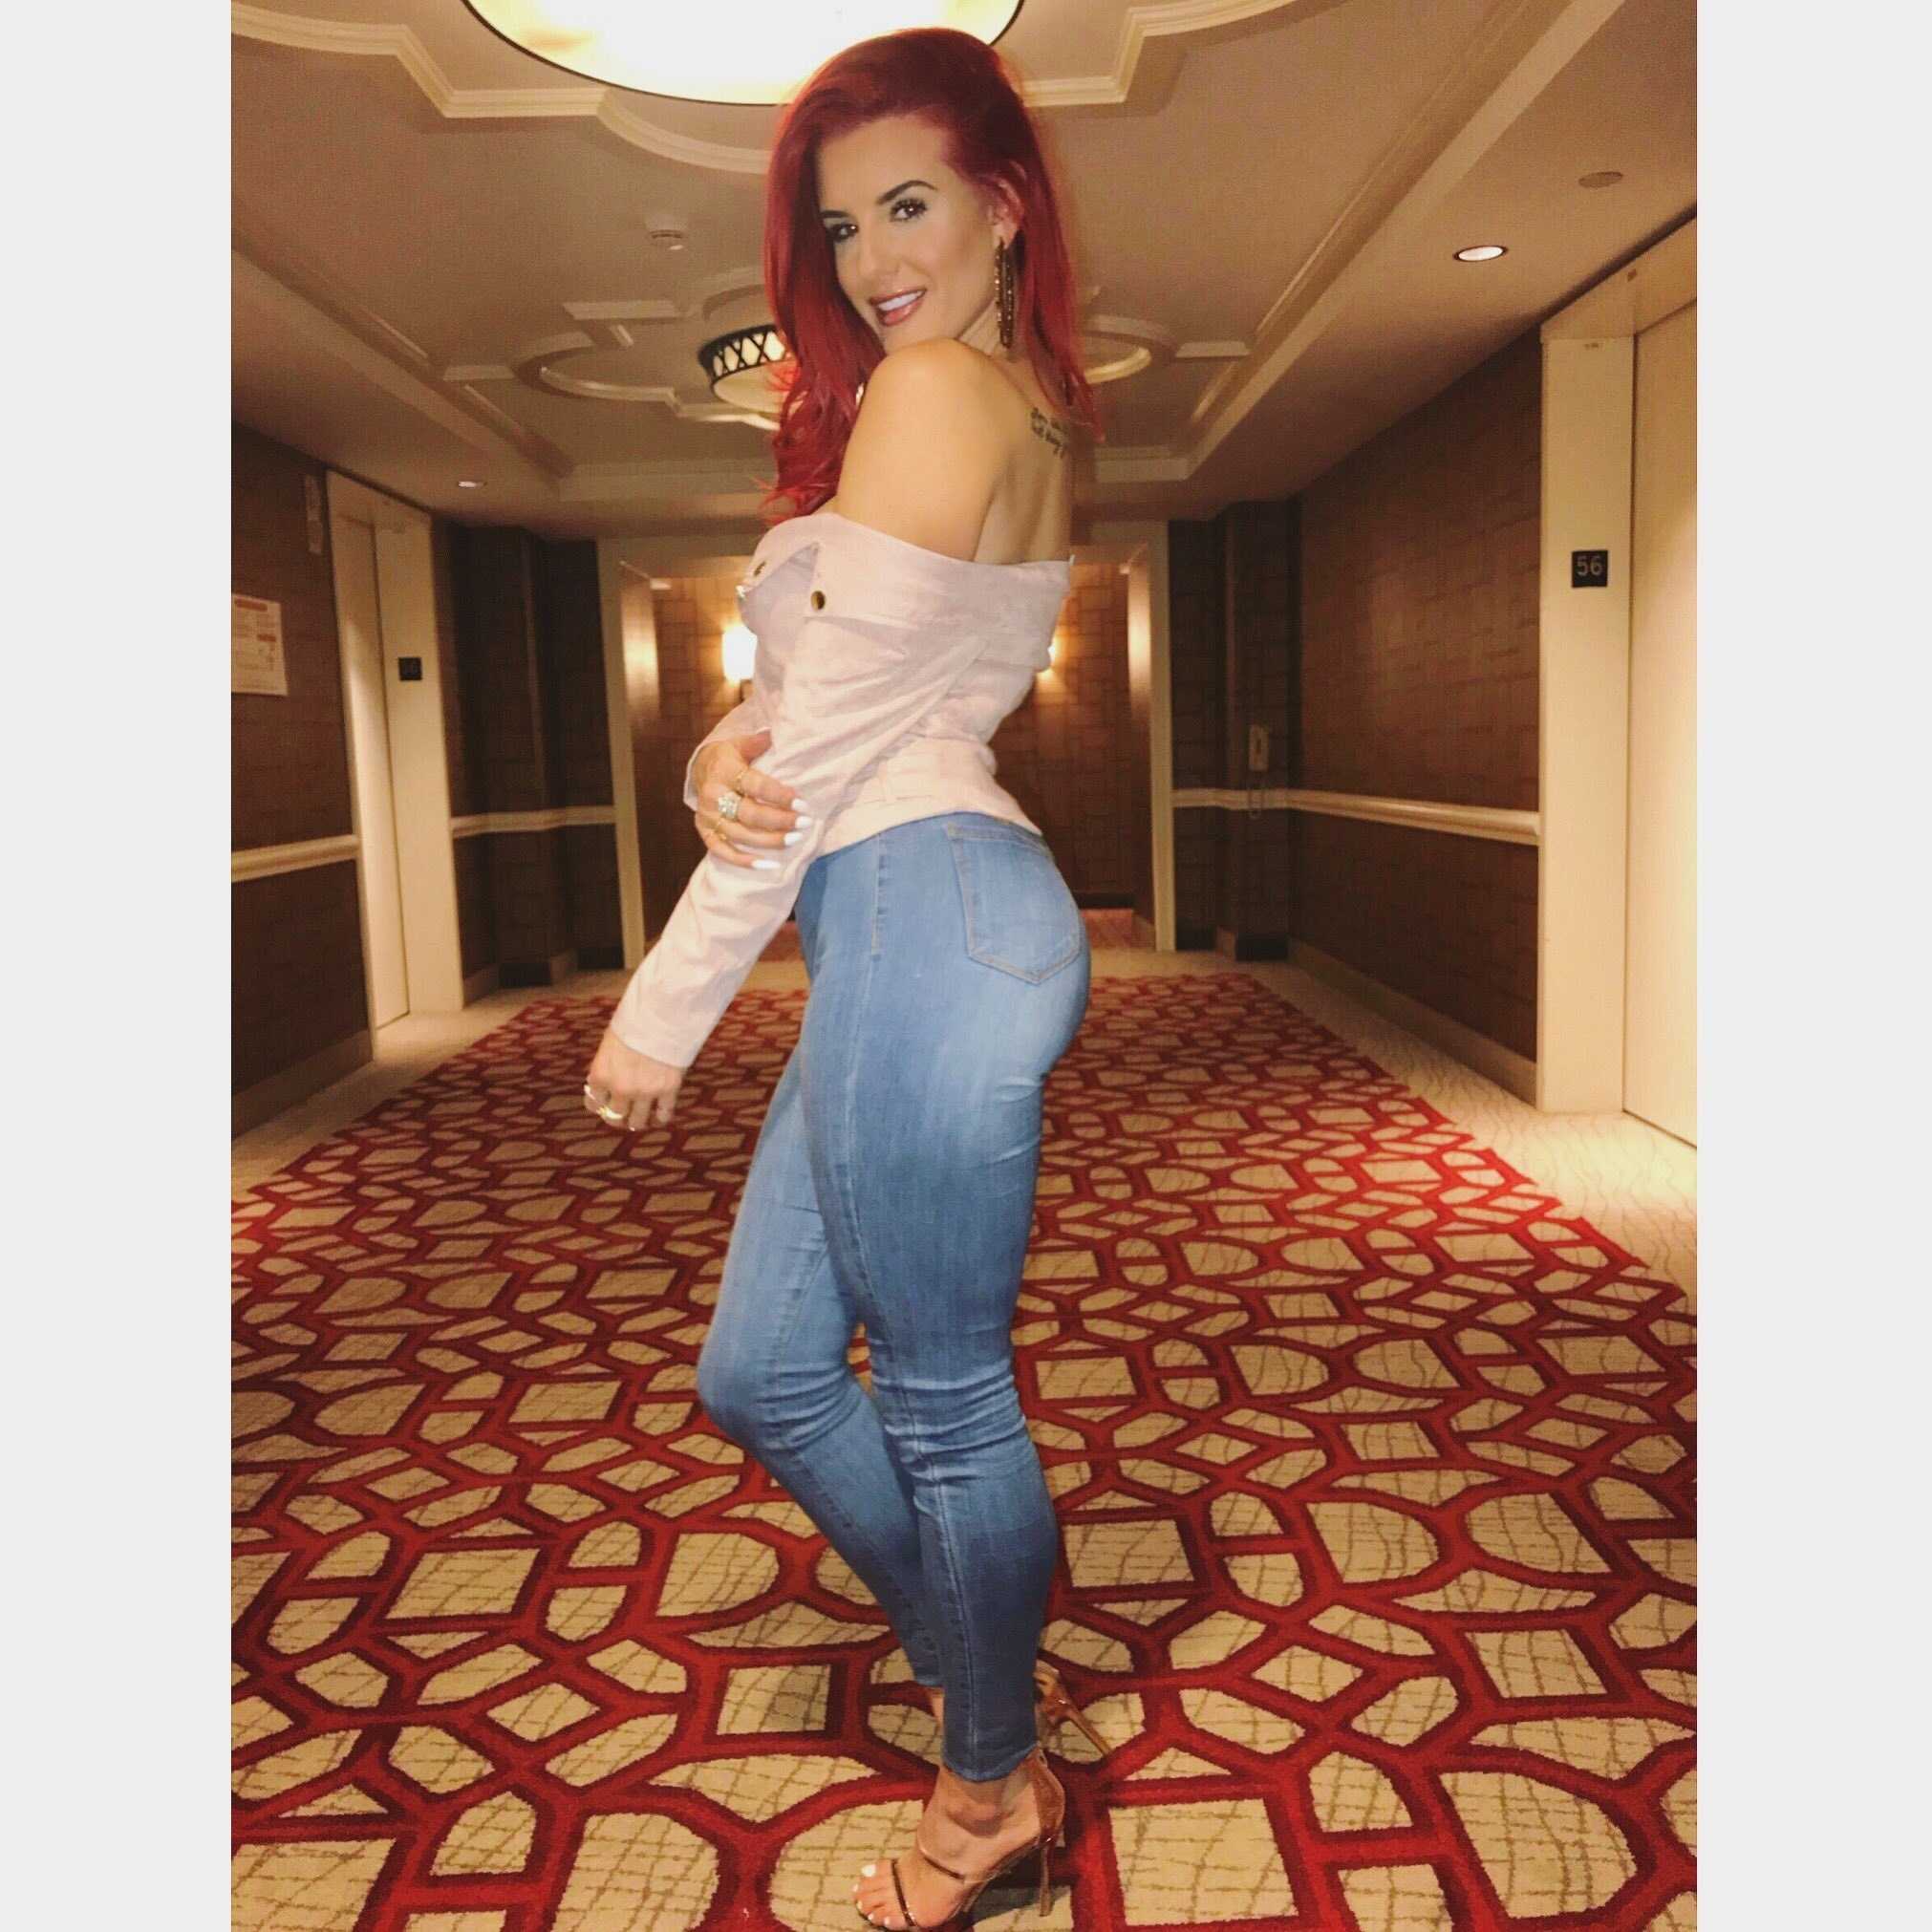 70+ Justina Valentine Hot Pictures Are Delight For Fans 155